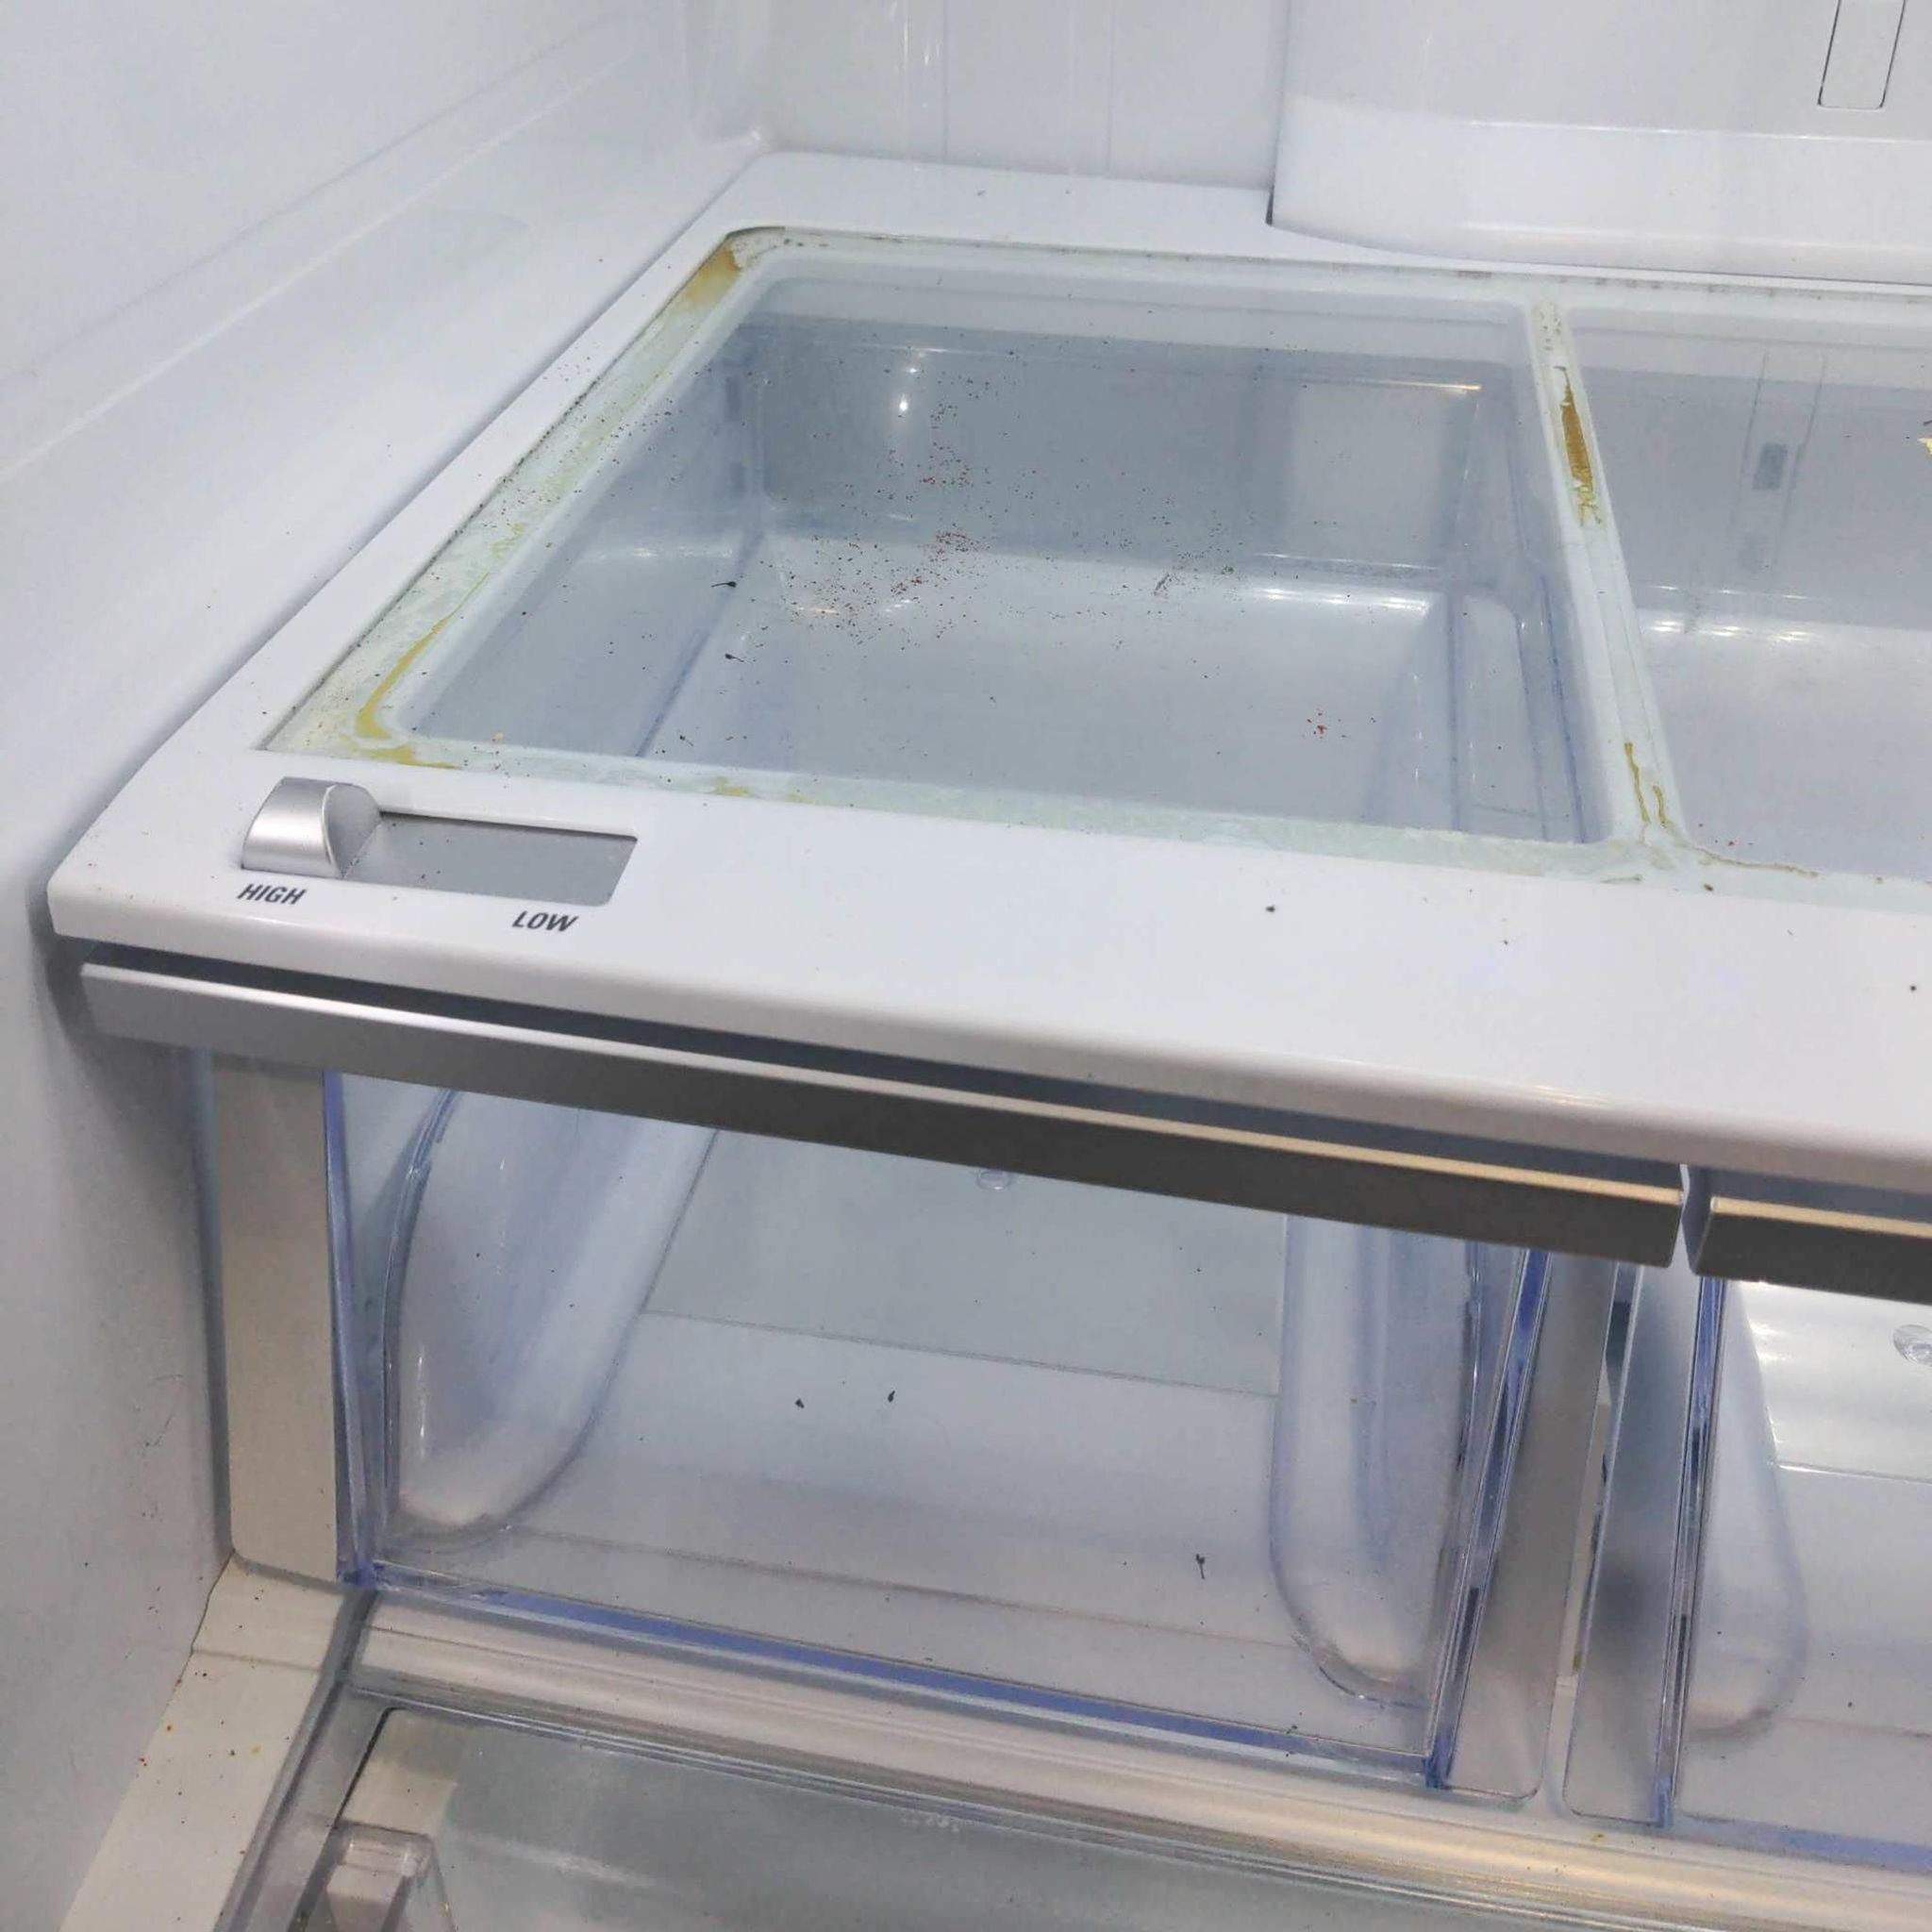 3. Interior of an LG refrigerator showing dirty glass shelves with crusted stains and spill residue.